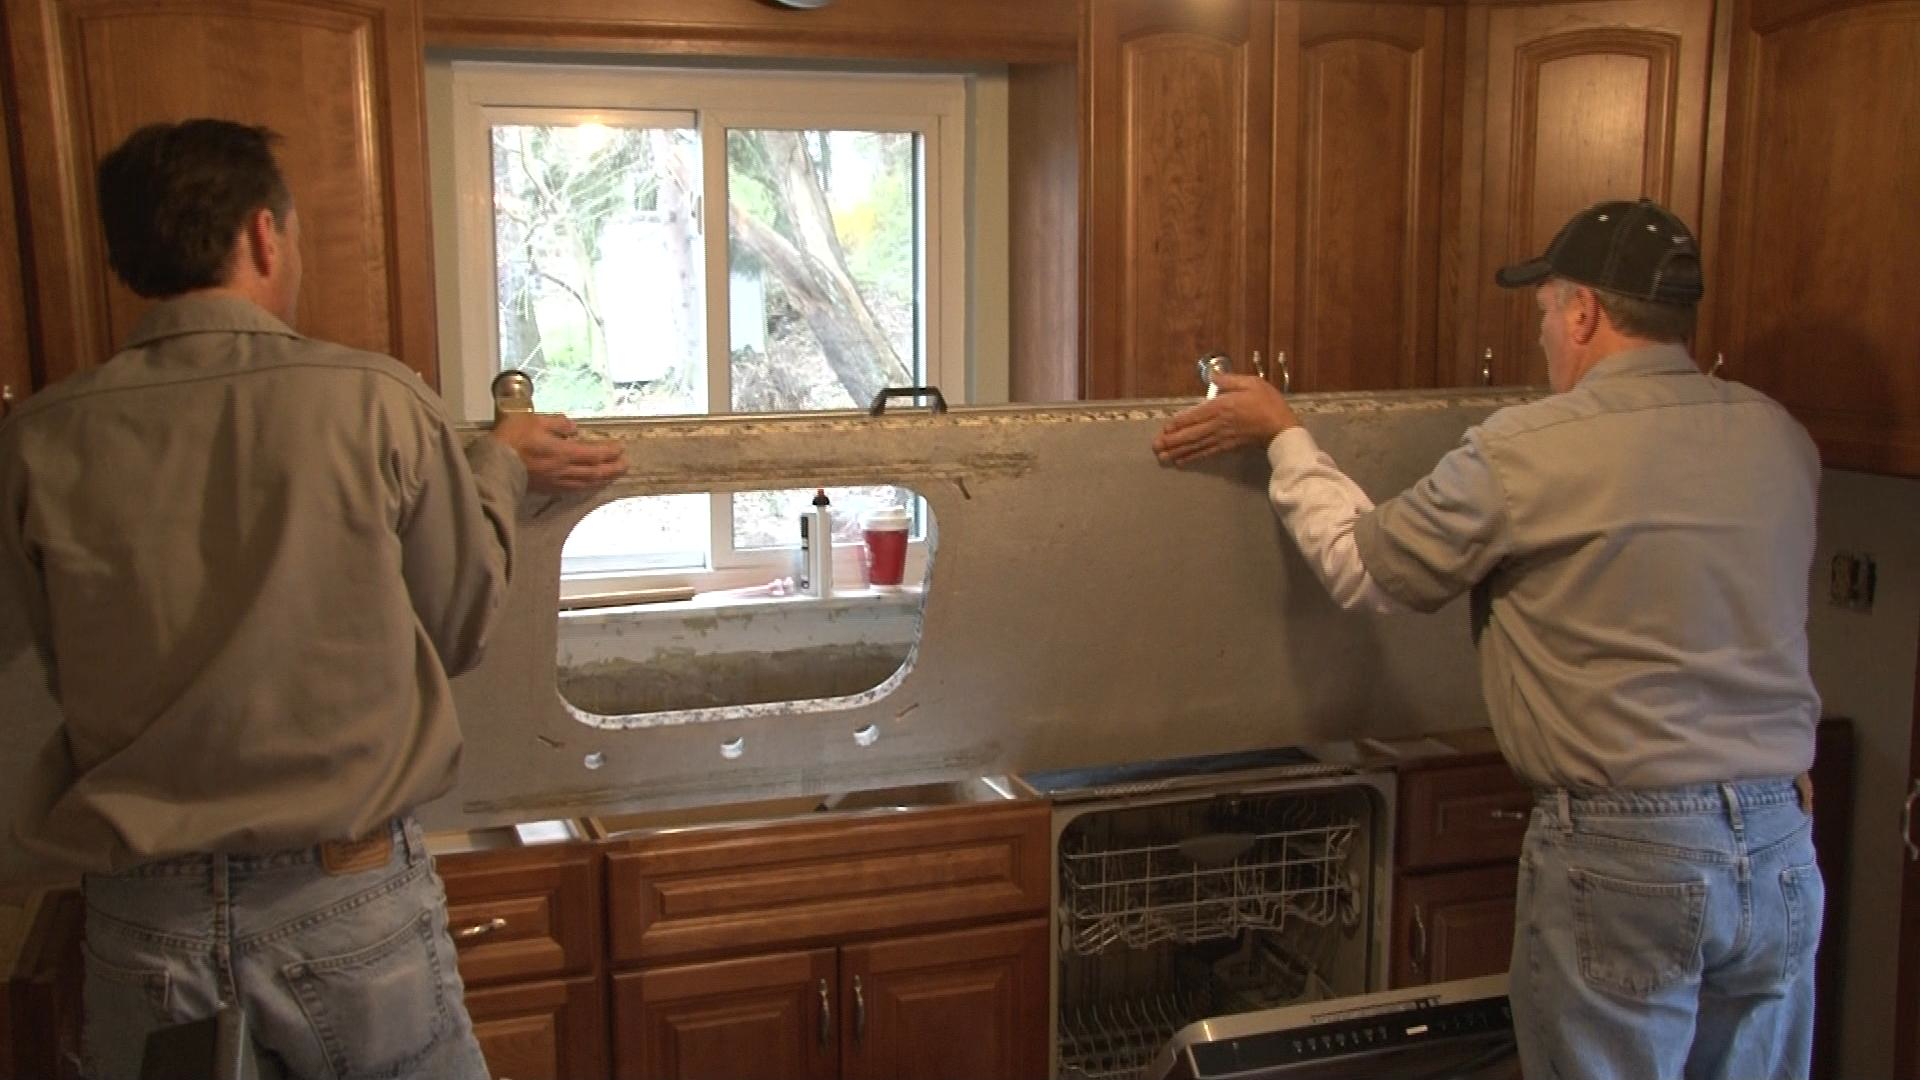 How To Install Granite Countertops Pro Construction Guide